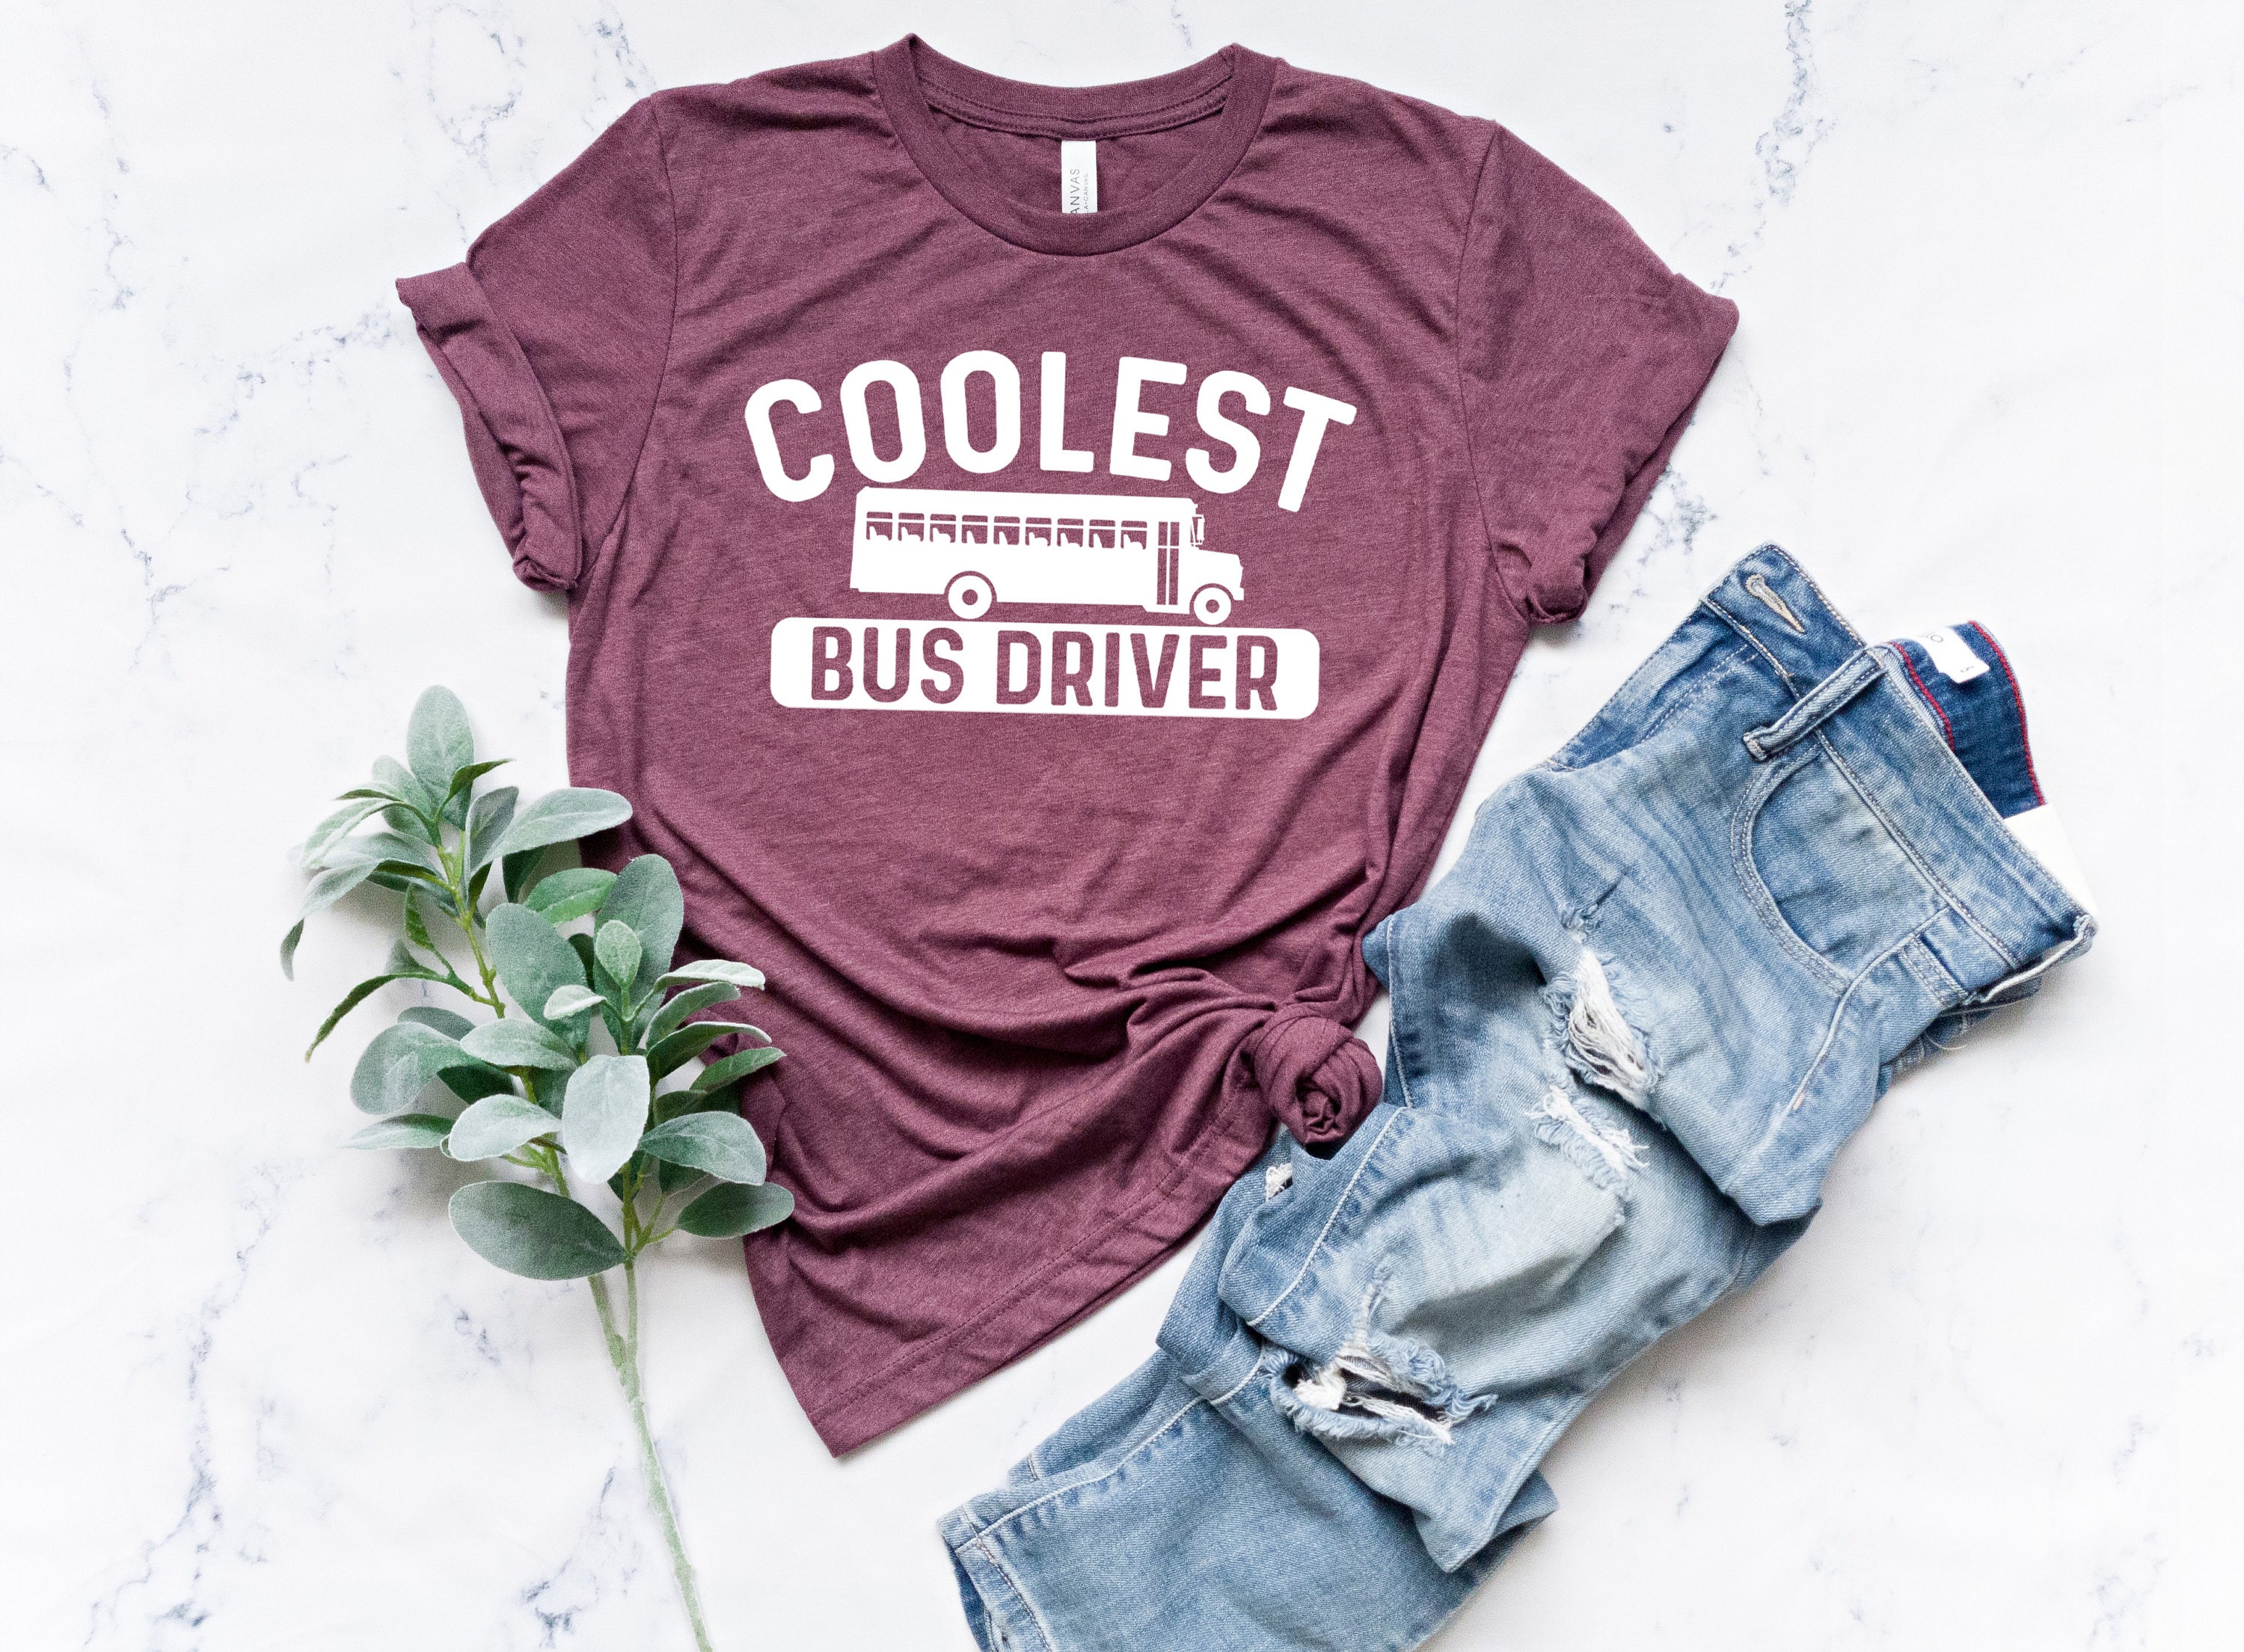 Comfy Tee for The Coolest Bus Driver 